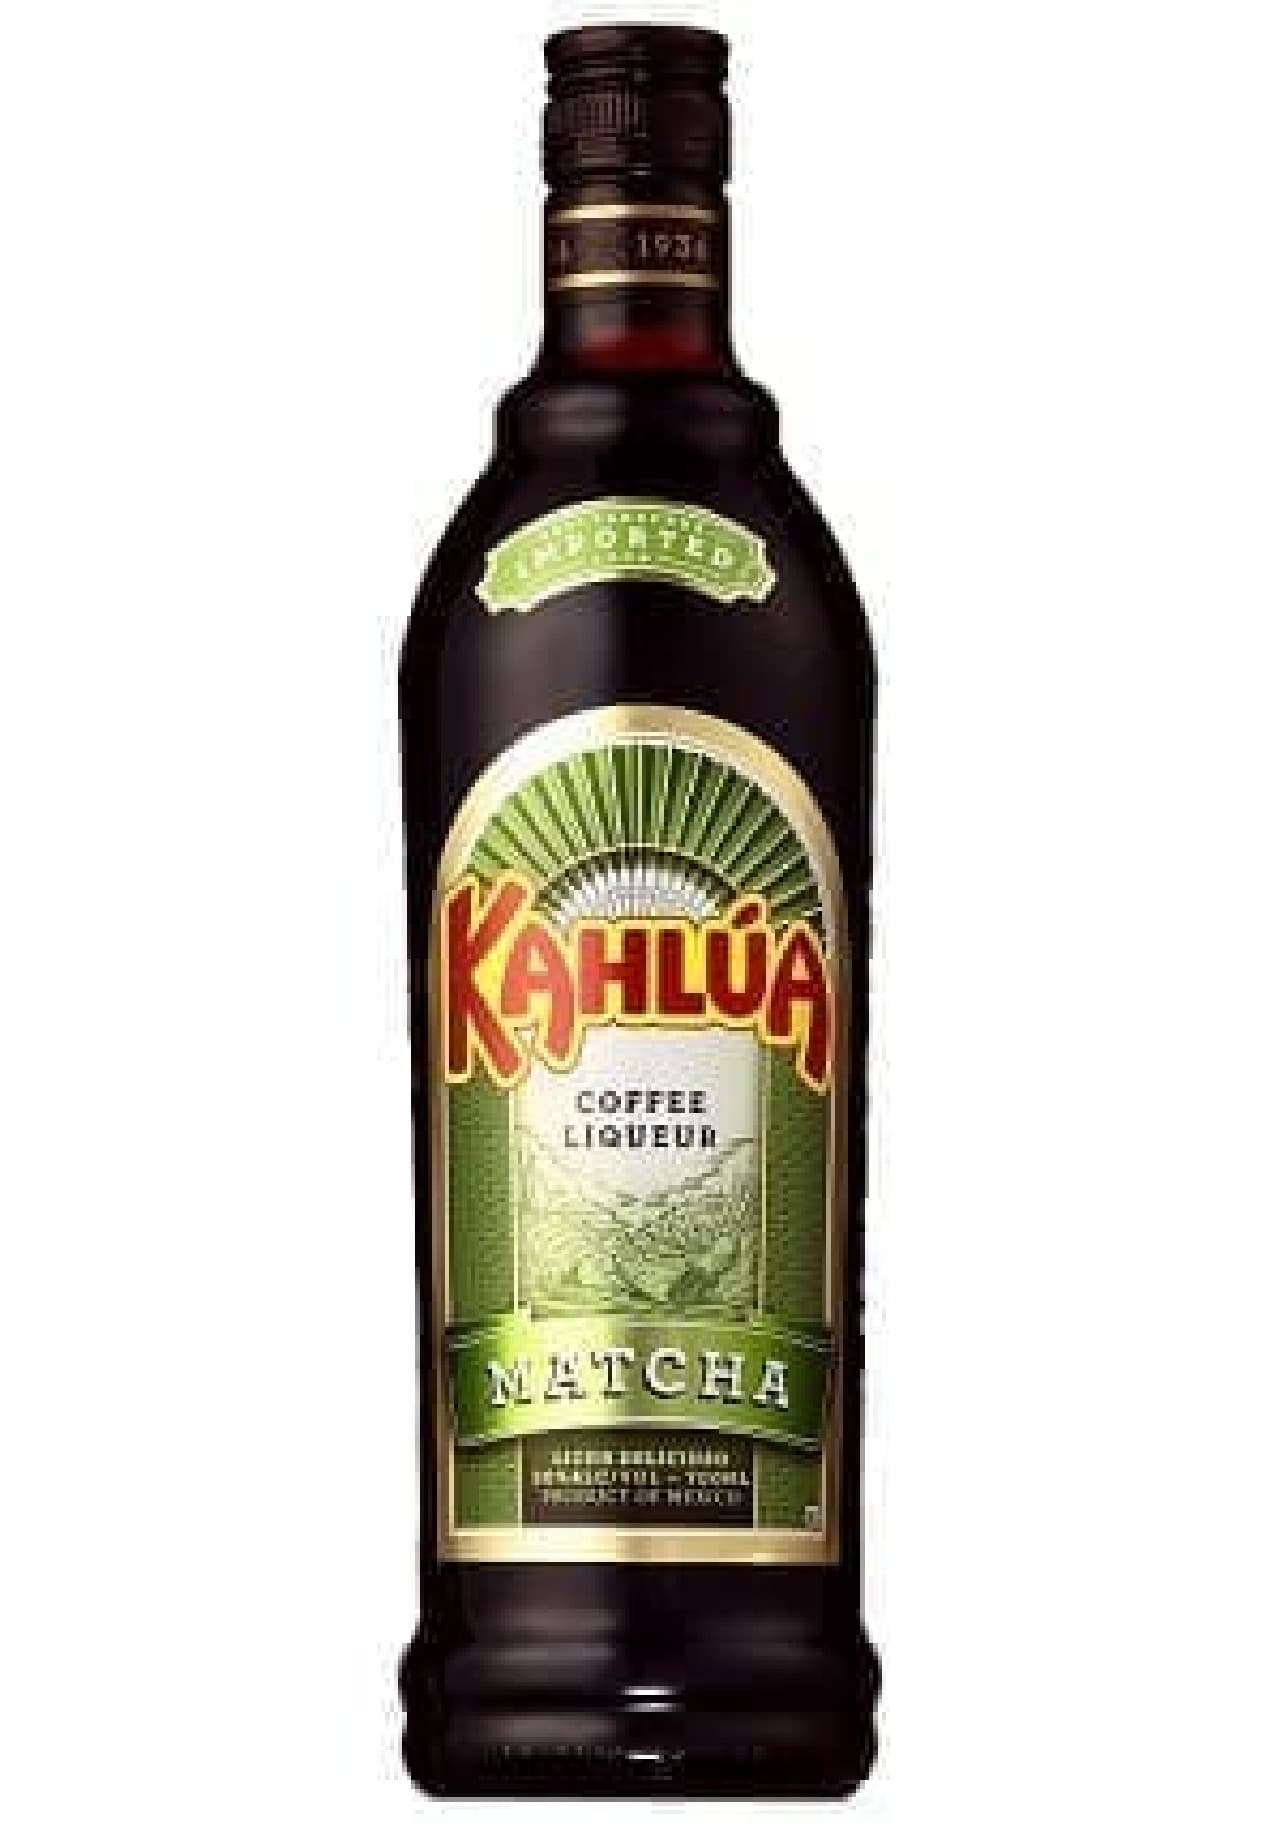 Matcha flavor is now available in Kahlua!